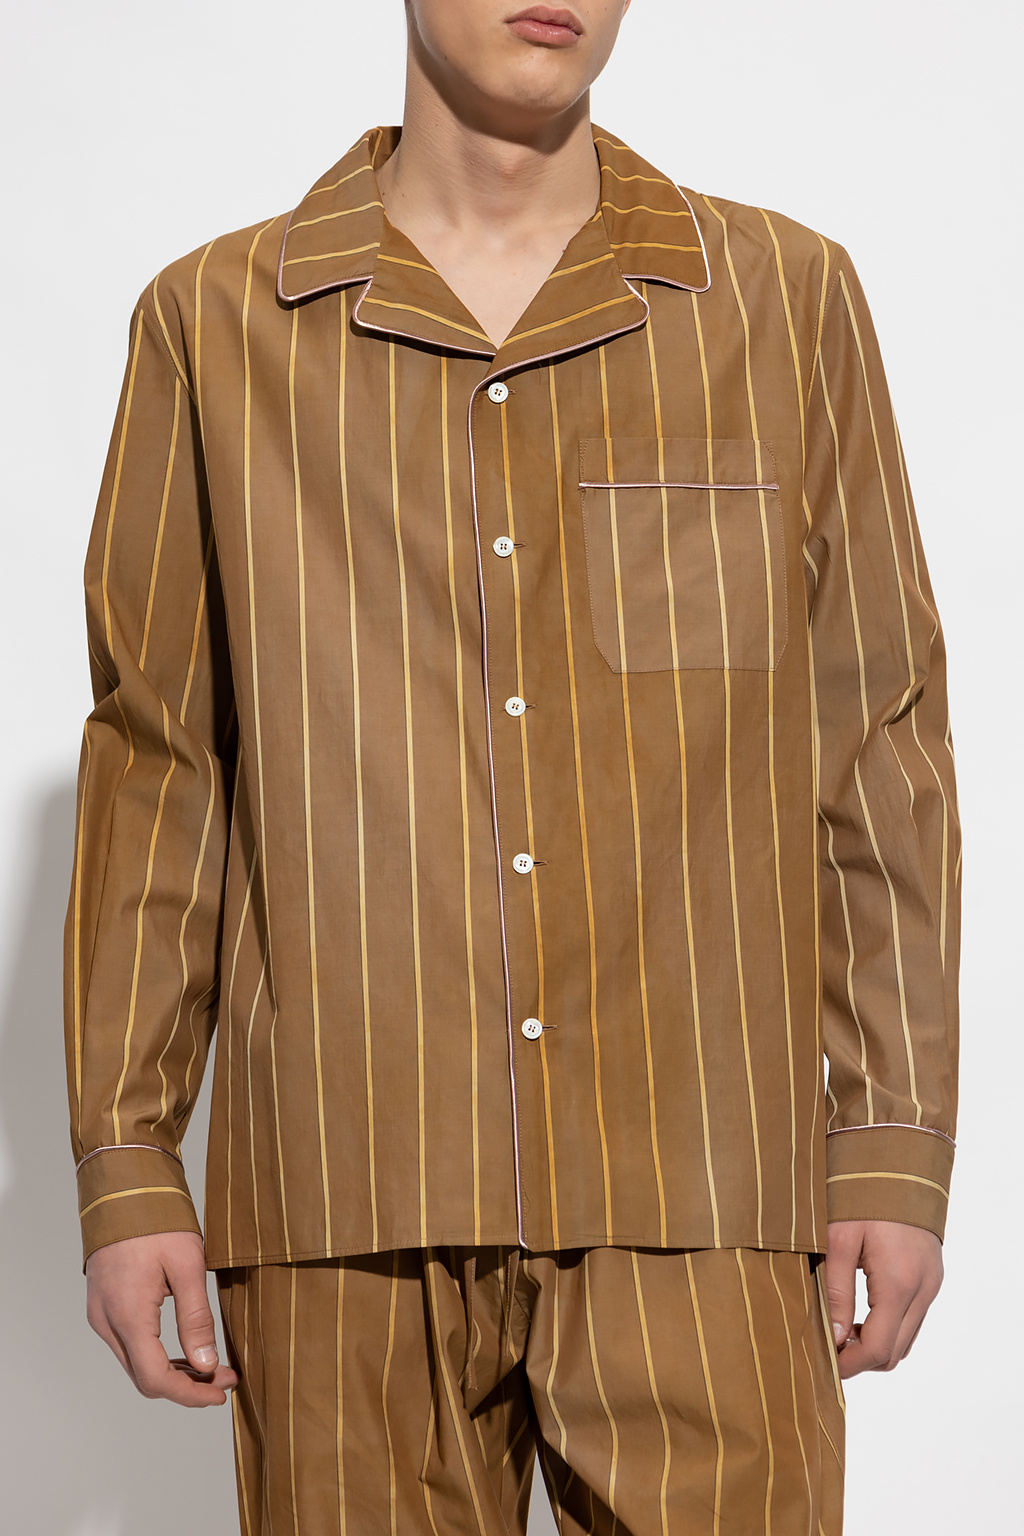 Nick Fouquet Shirt with pocket